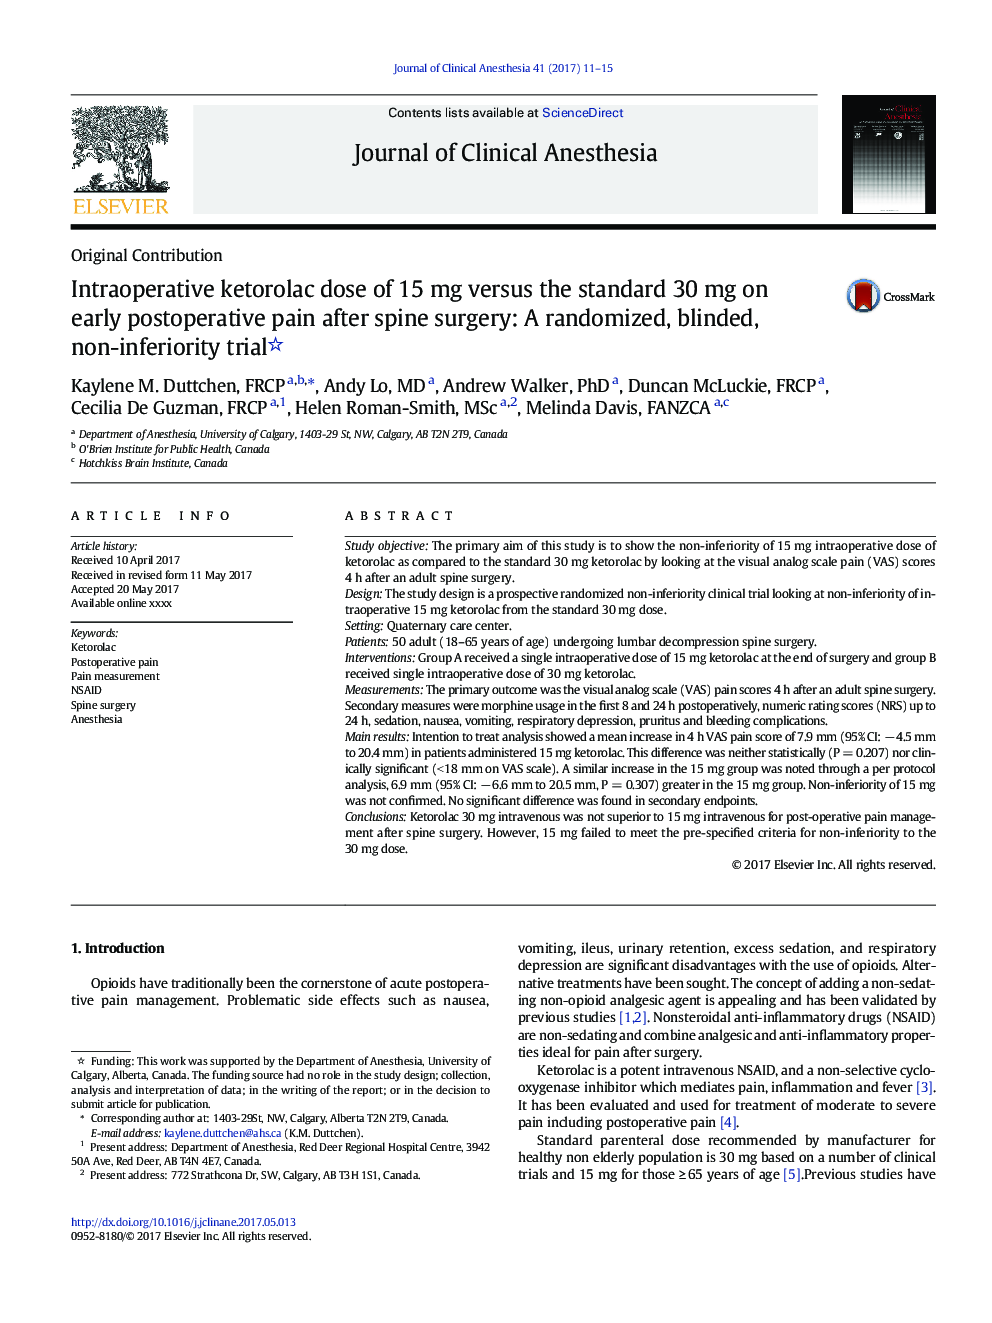 Intraoperative ketorolac dose of 15Â mg versus the standard 30Â mg on early postoperative pain after spine surgery: A randomized, blinded, non-inferiority trial